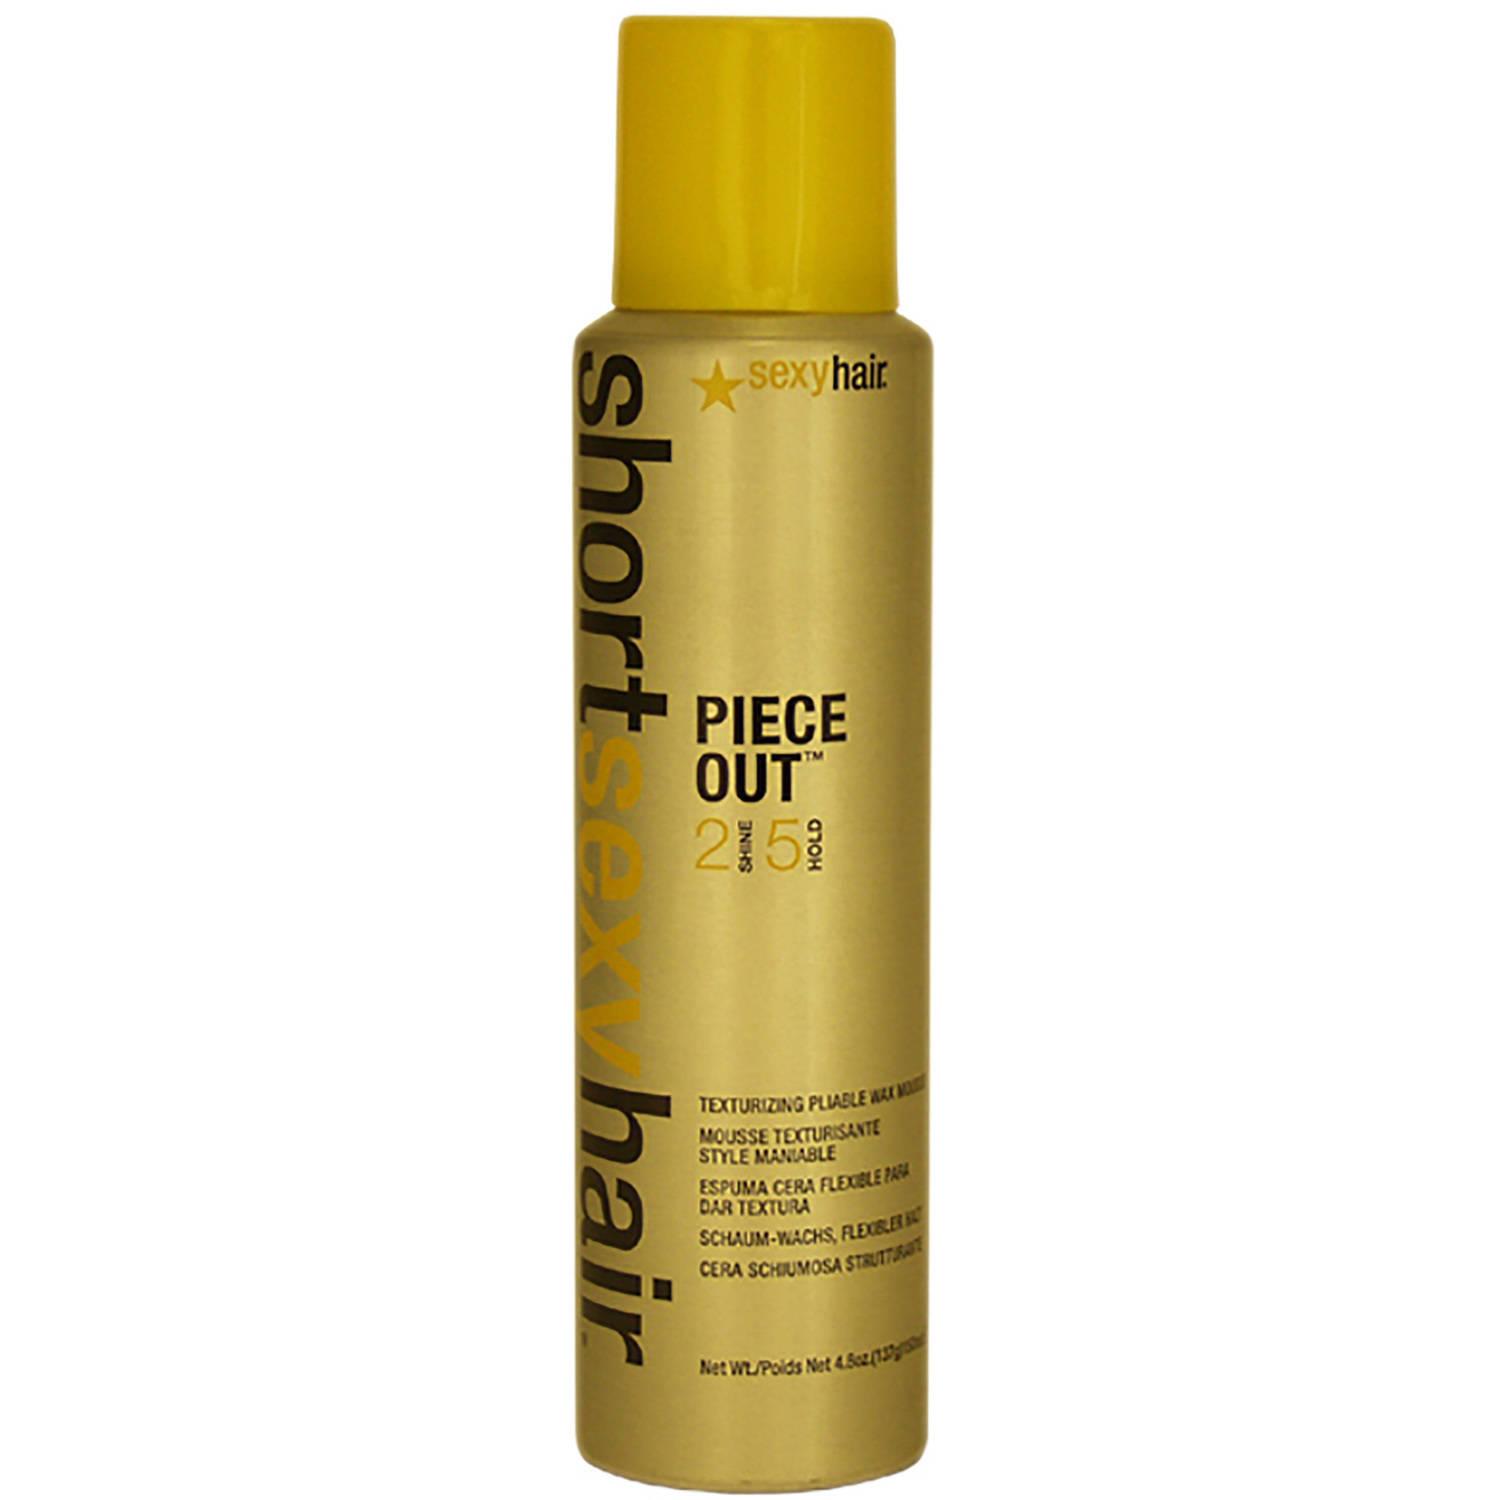 Short Sexy Hair Piece Out Wax Mousse by Sexy Hair for Unisex, 4.8 oz